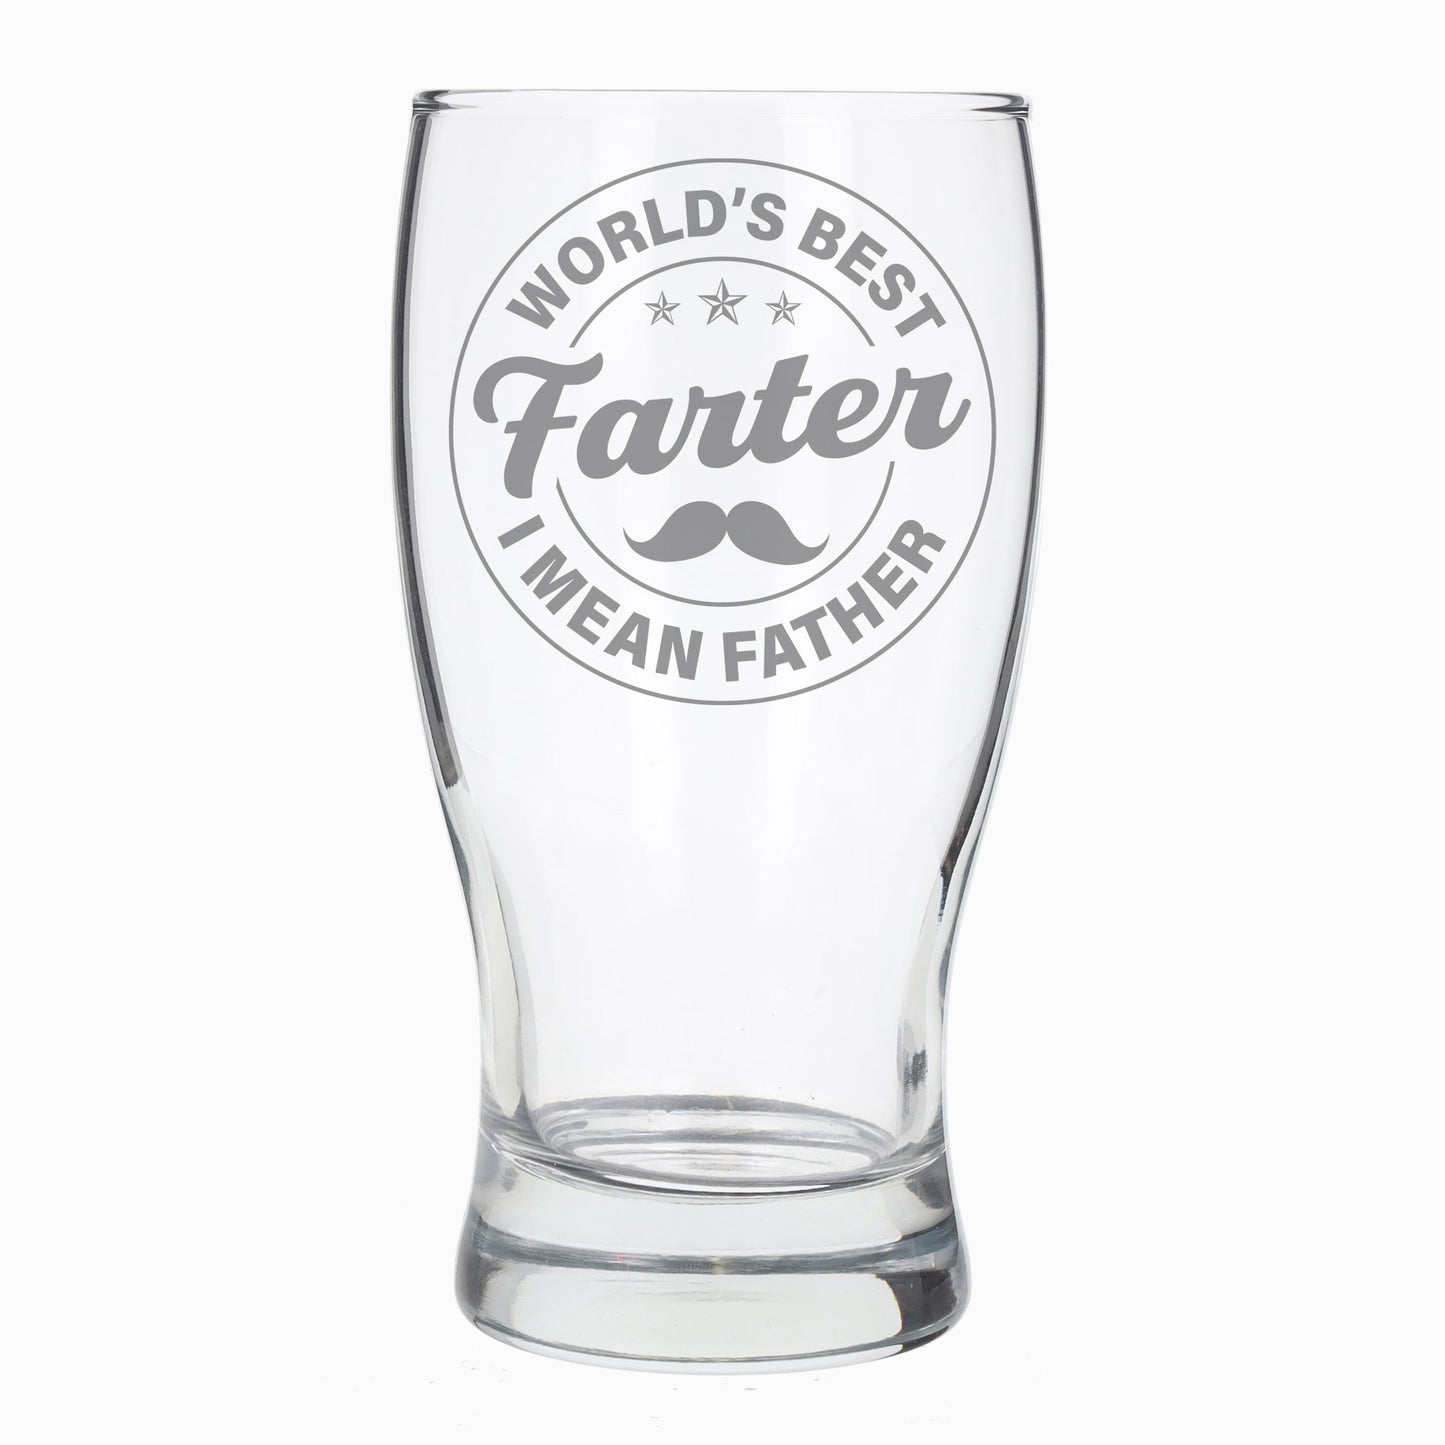 Worlds Best Farter I Mean Father Engraved Beer Glass and/or Coaster Set  - Always Looking Good - Circle Style Beer Glass Only  